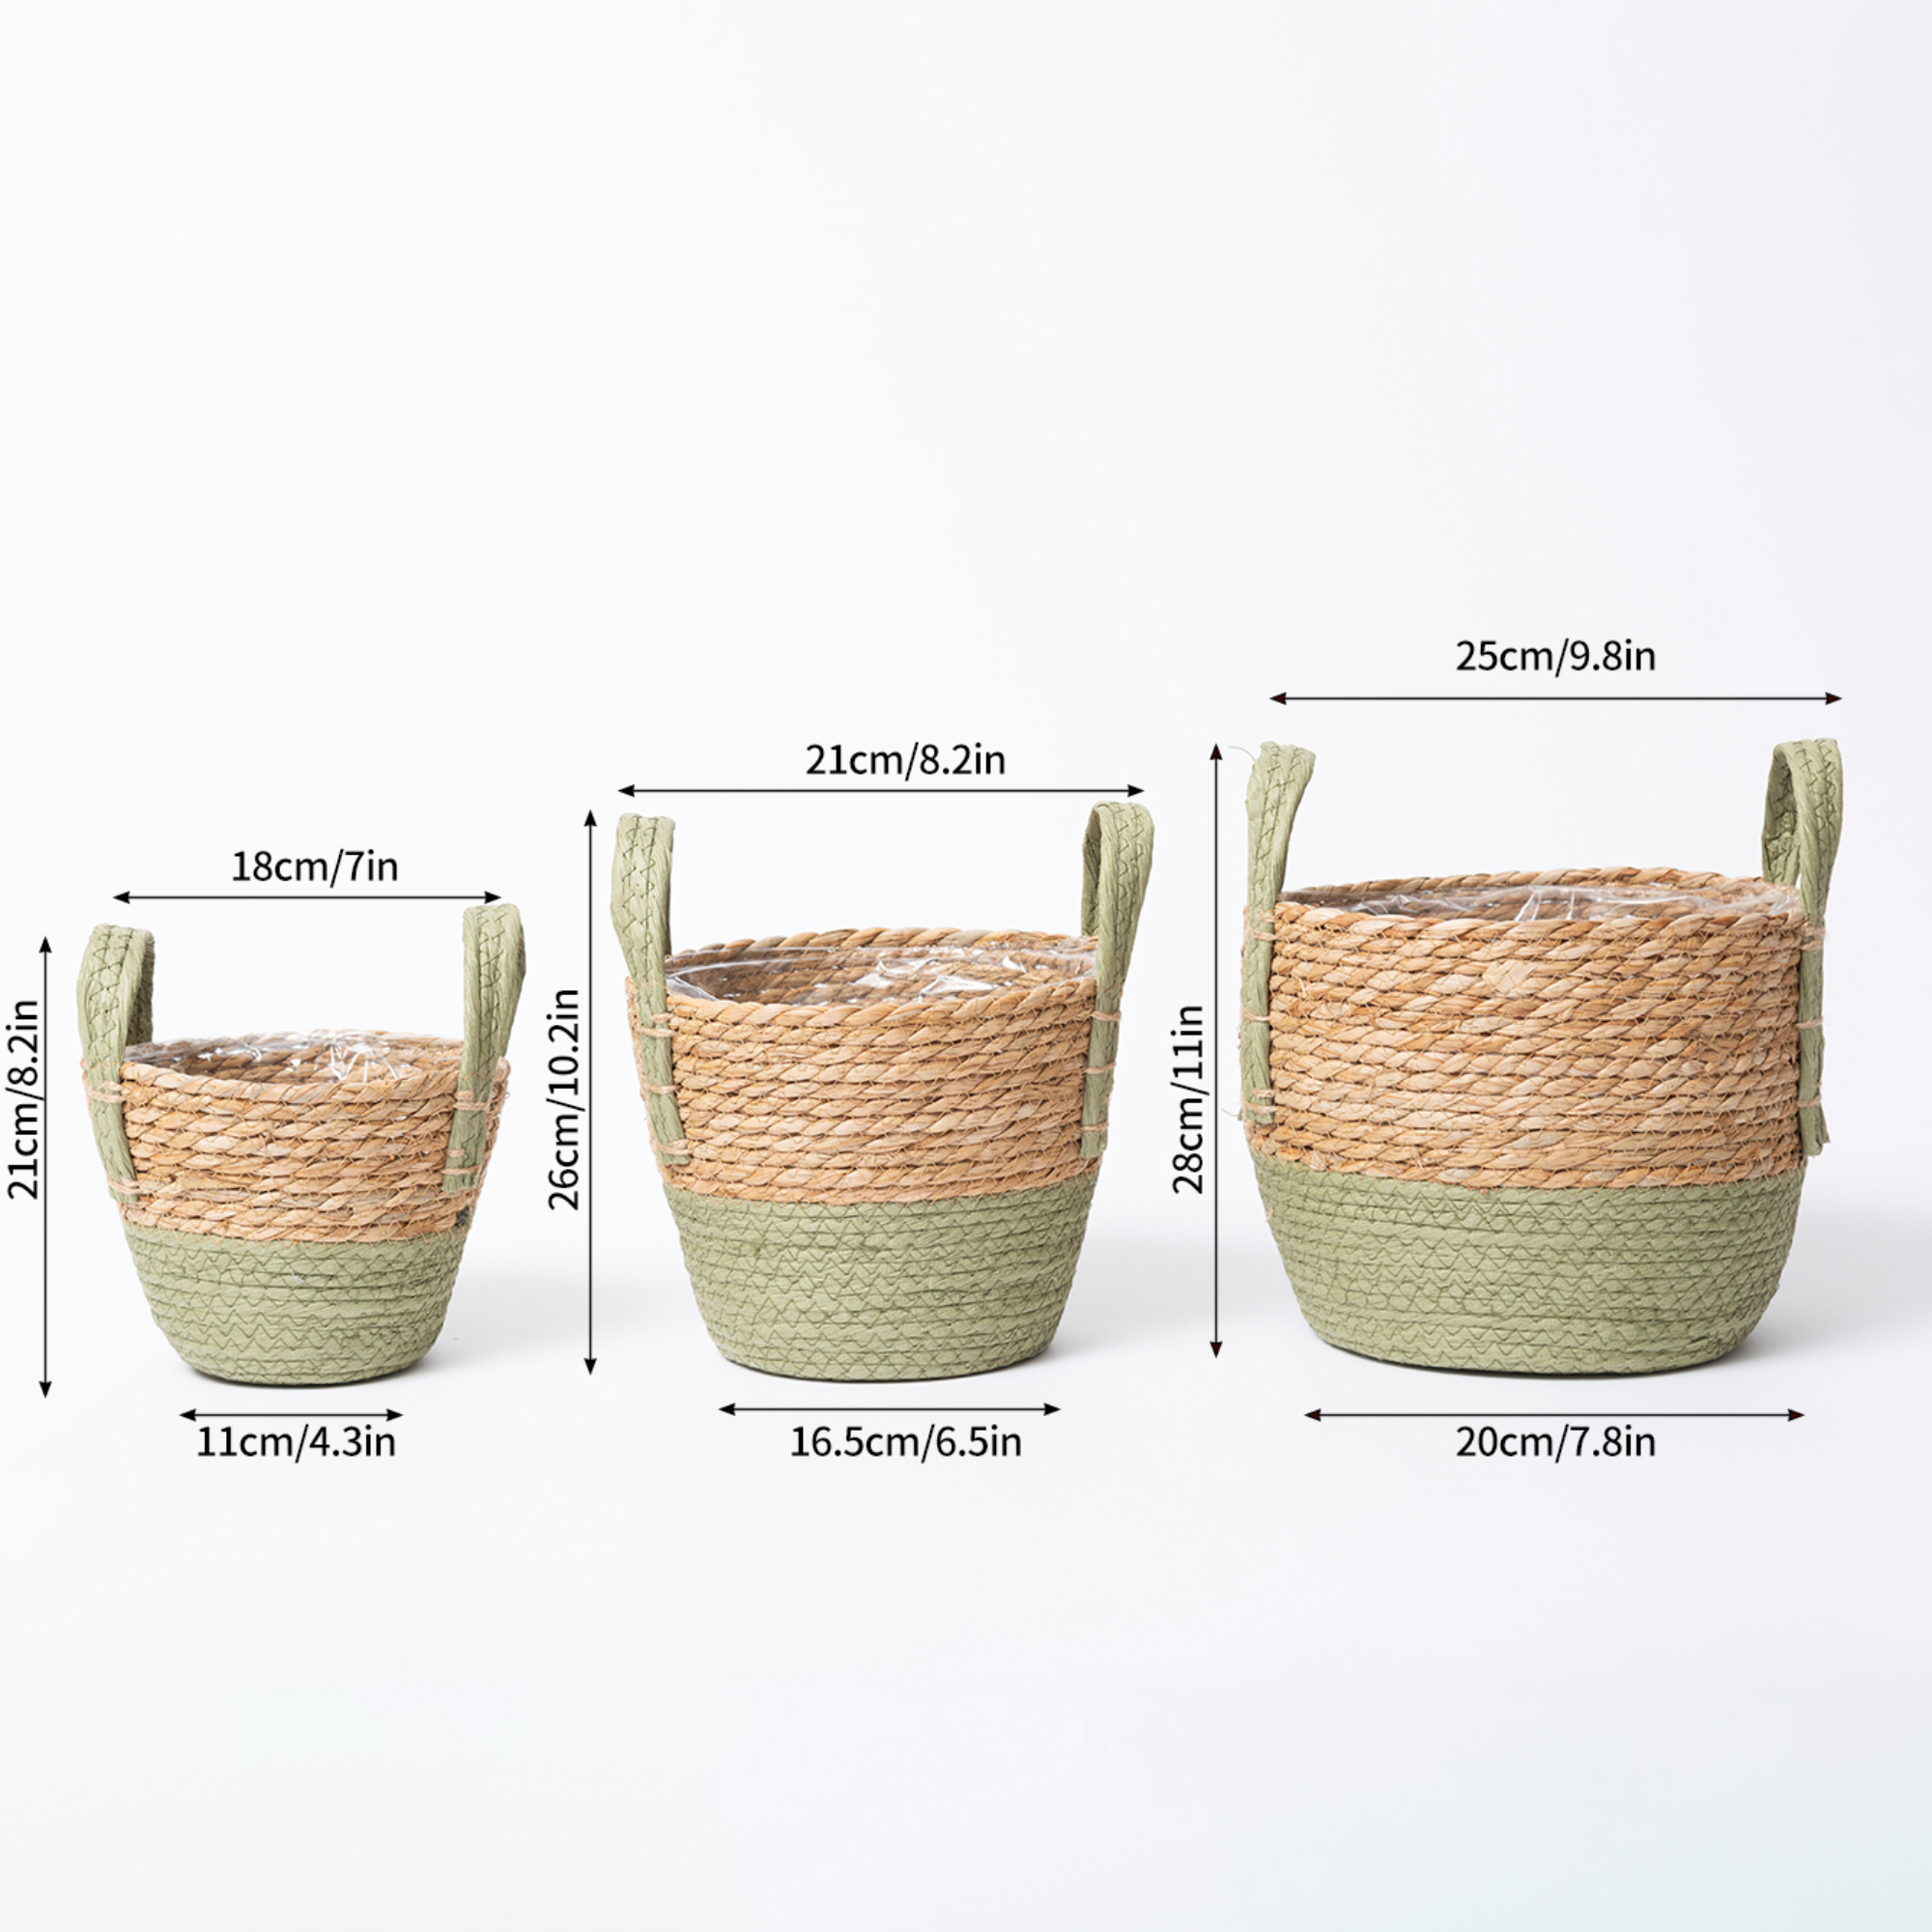 Vintiquewise QI004174.3 Straw Decorative Round Storage Basket Set of 3 with Woven Handles for The Playroom, Bedroom, and Living Room